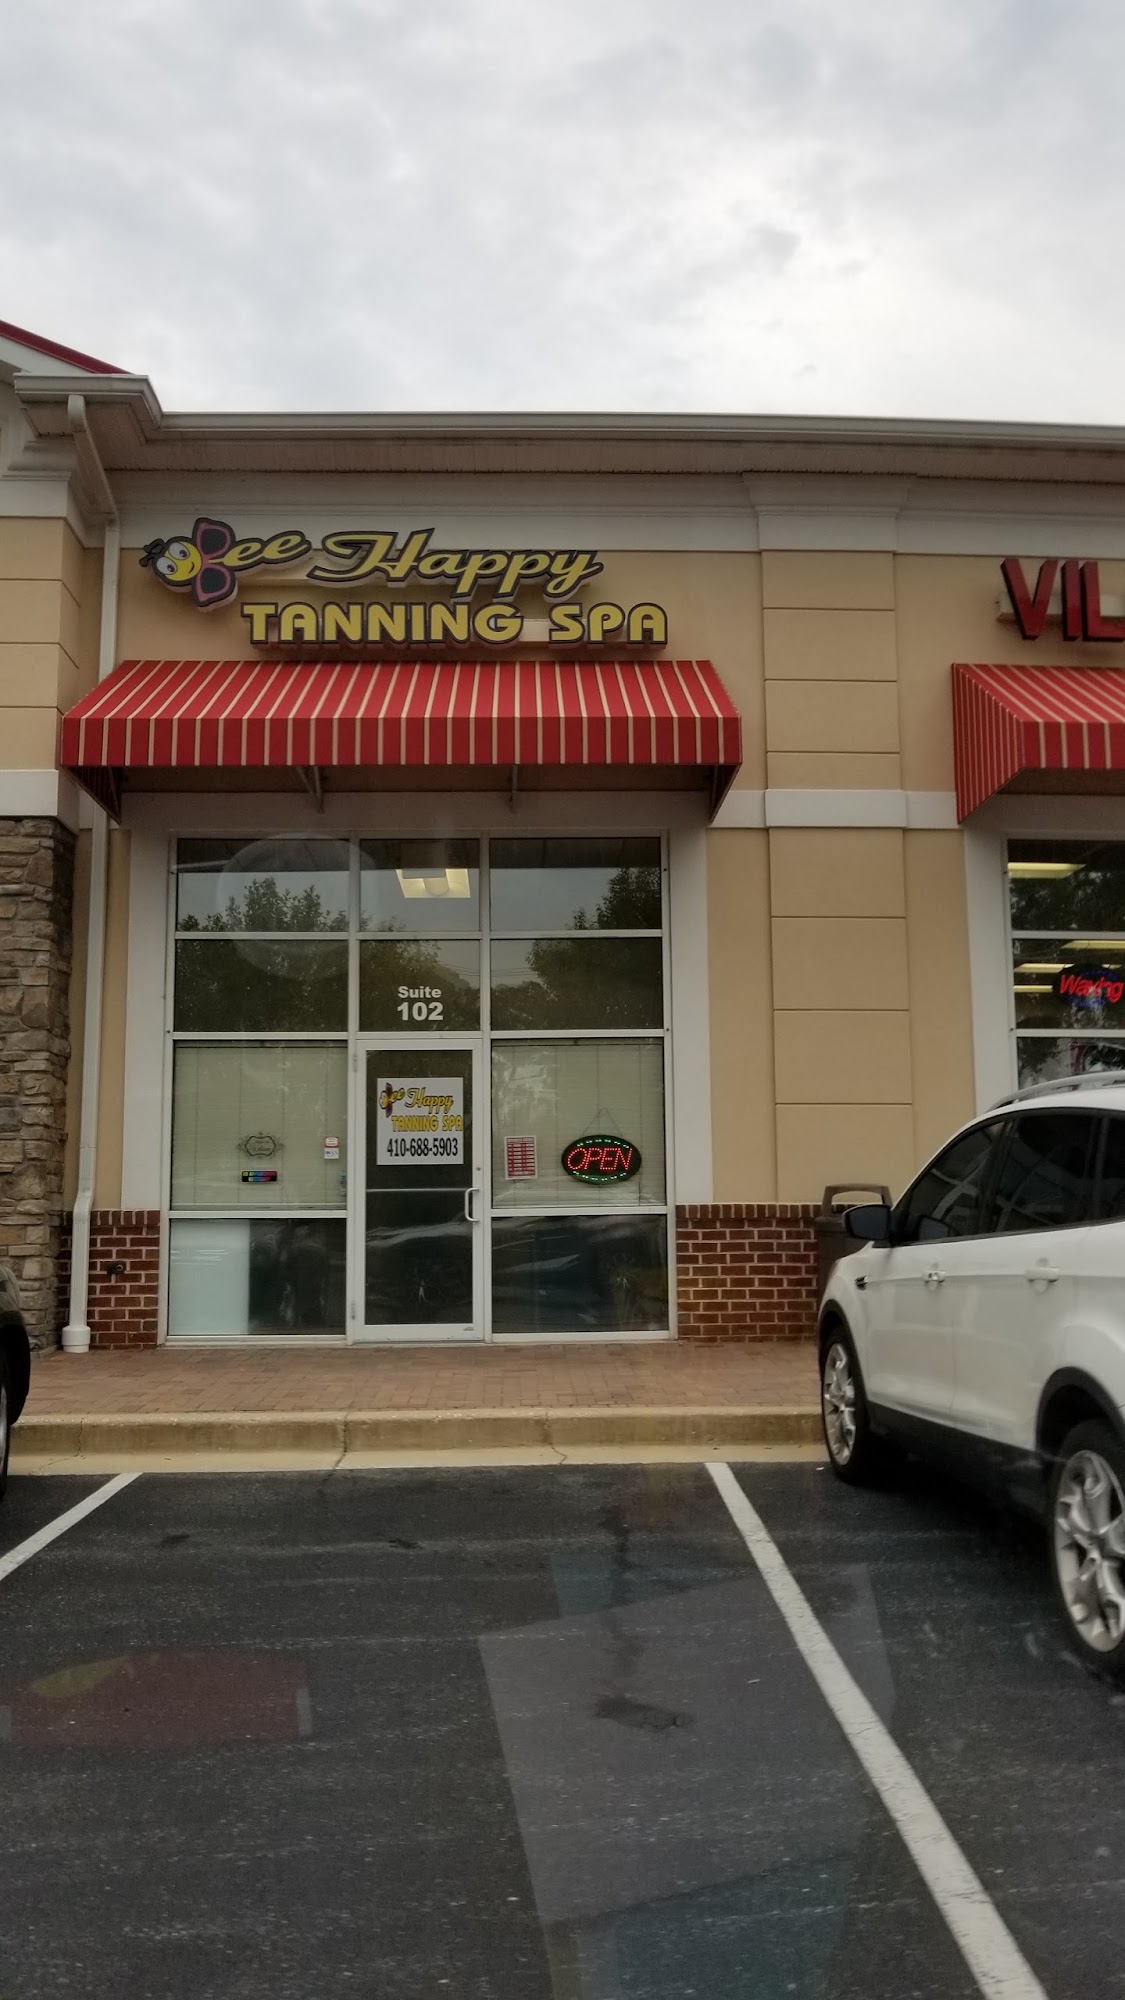 Bee Happy Tanning Spa 110 S Piney Rd # 102, Chester Maryland 21619